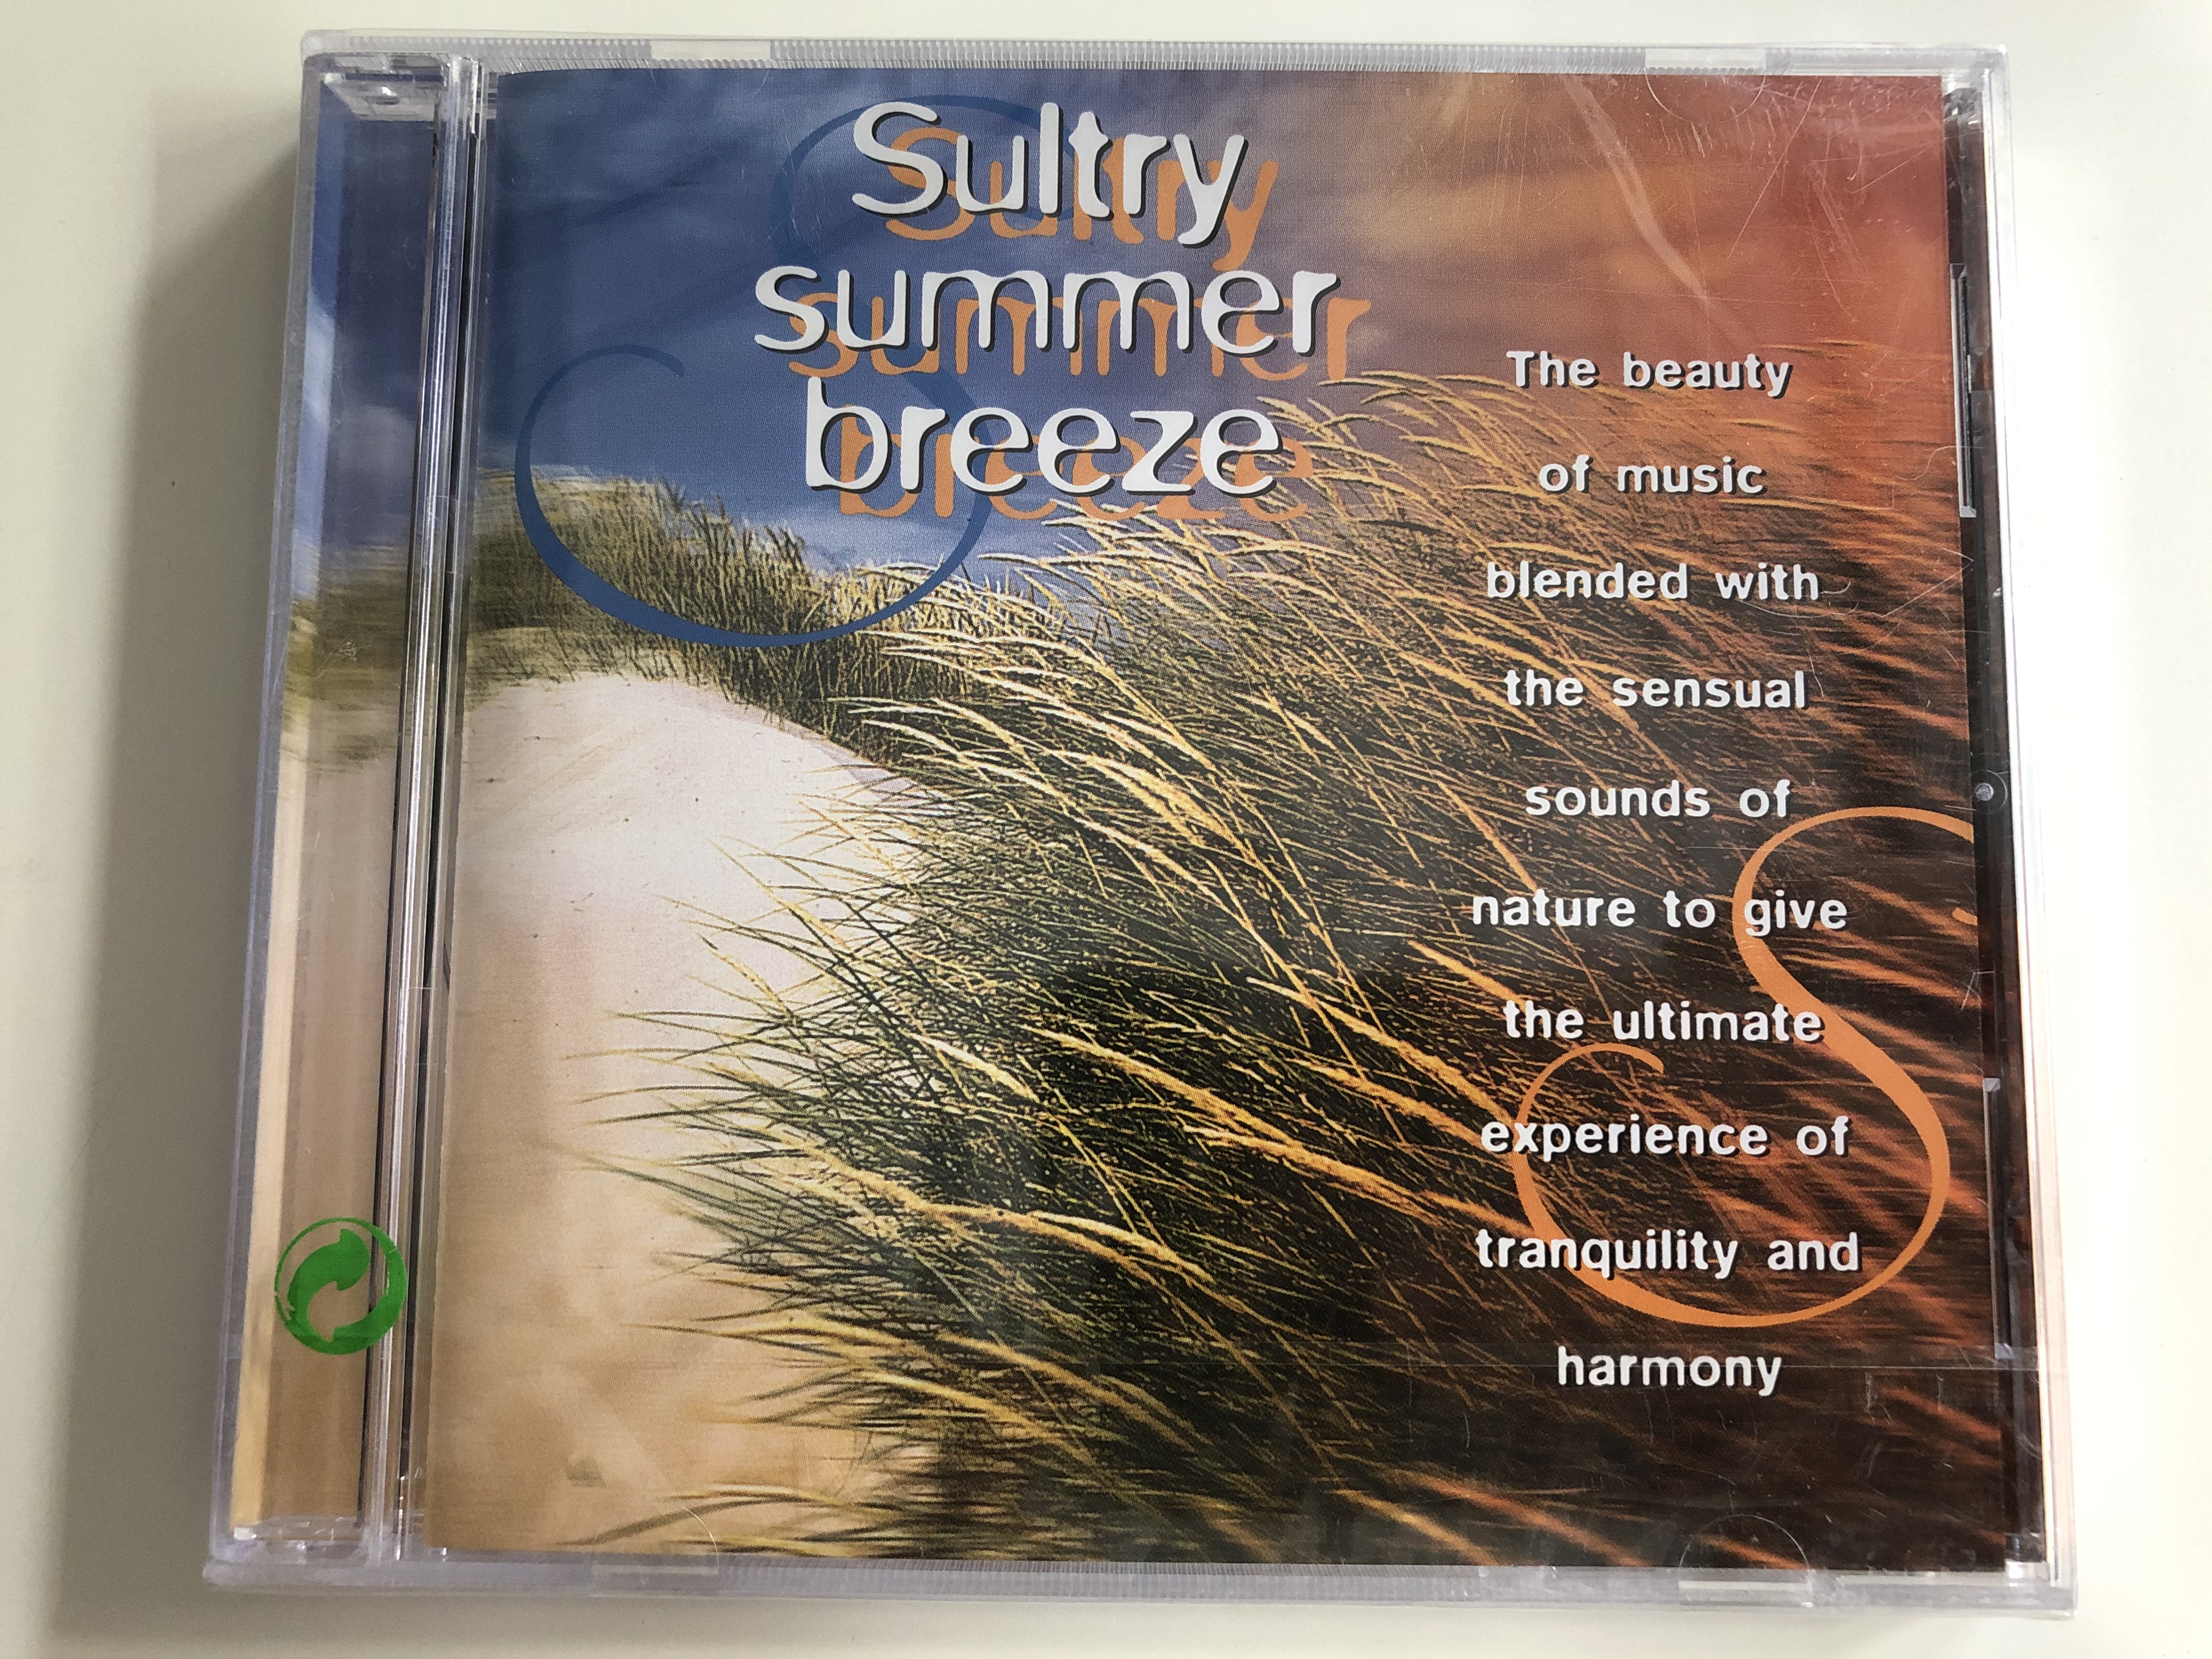 sultry-summer-breeze-the-beauty-of-music-blended-with-the-sensual-sounds-of-nature-to-give-the-ultimate-experience-of-tranquility-and-harmony-disky-audio-cd-1997-dc-879502-1-.jpg